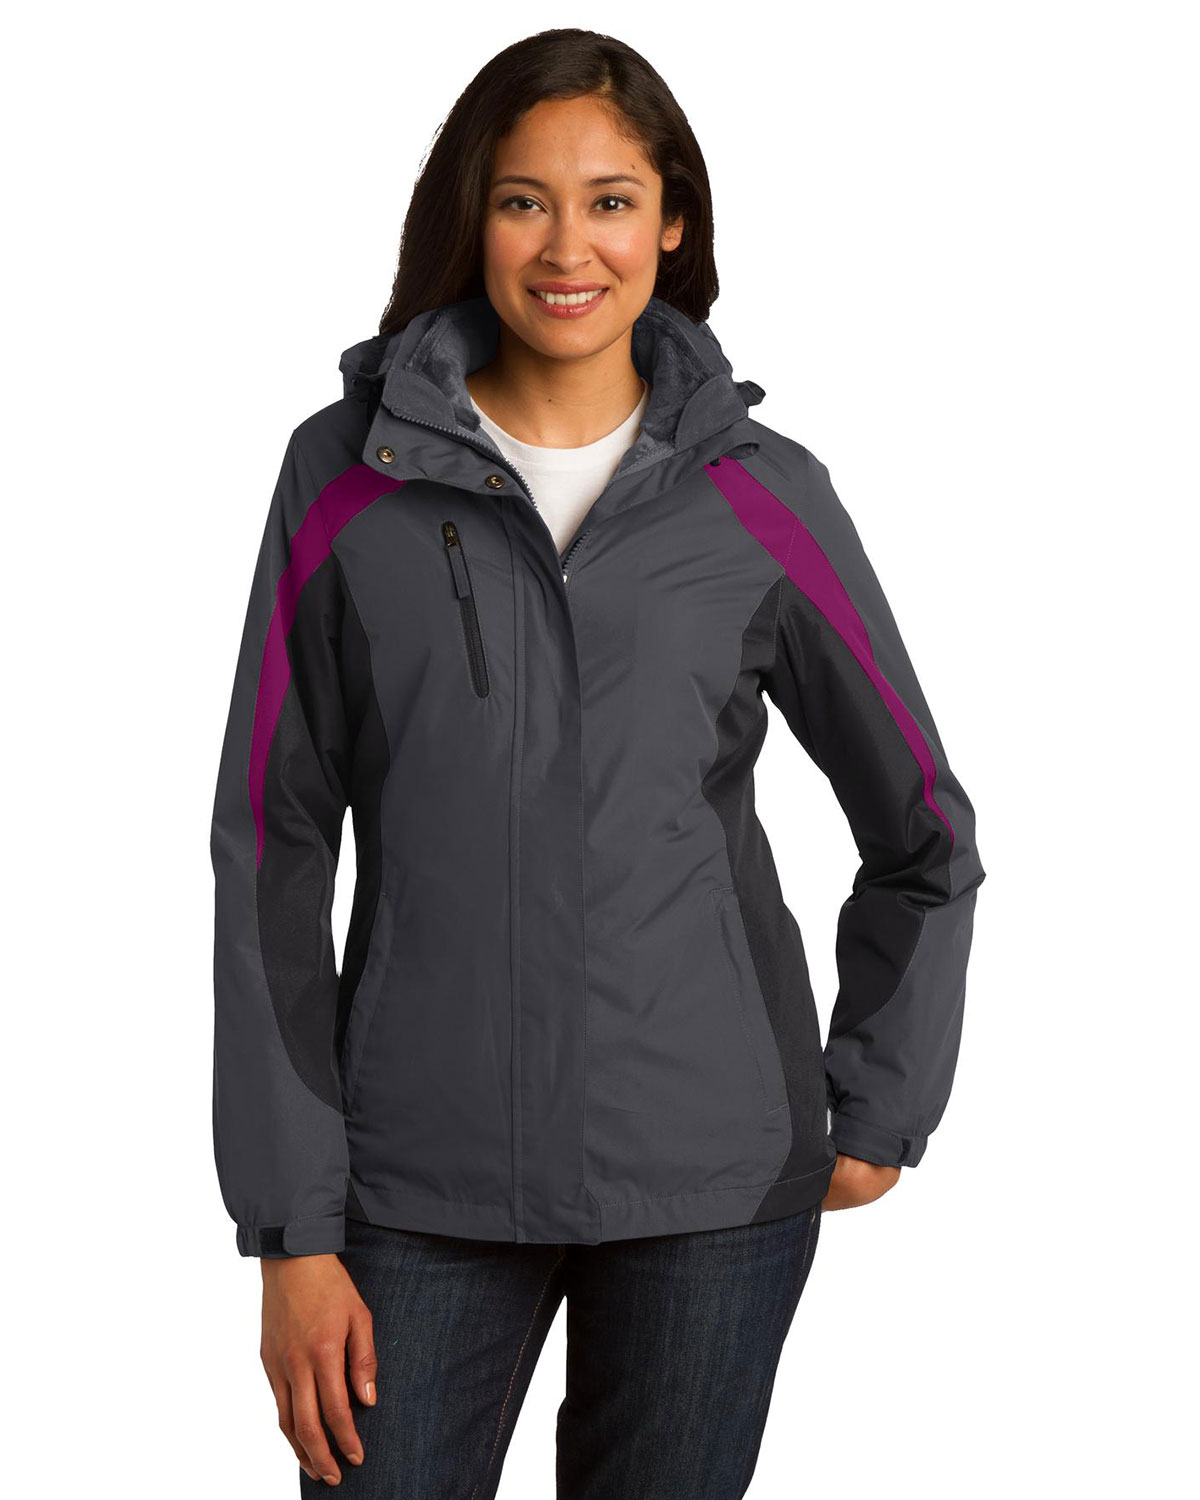 Port Authority L321 Women Colorblock 3-in-1 Jacket at Apparelstation